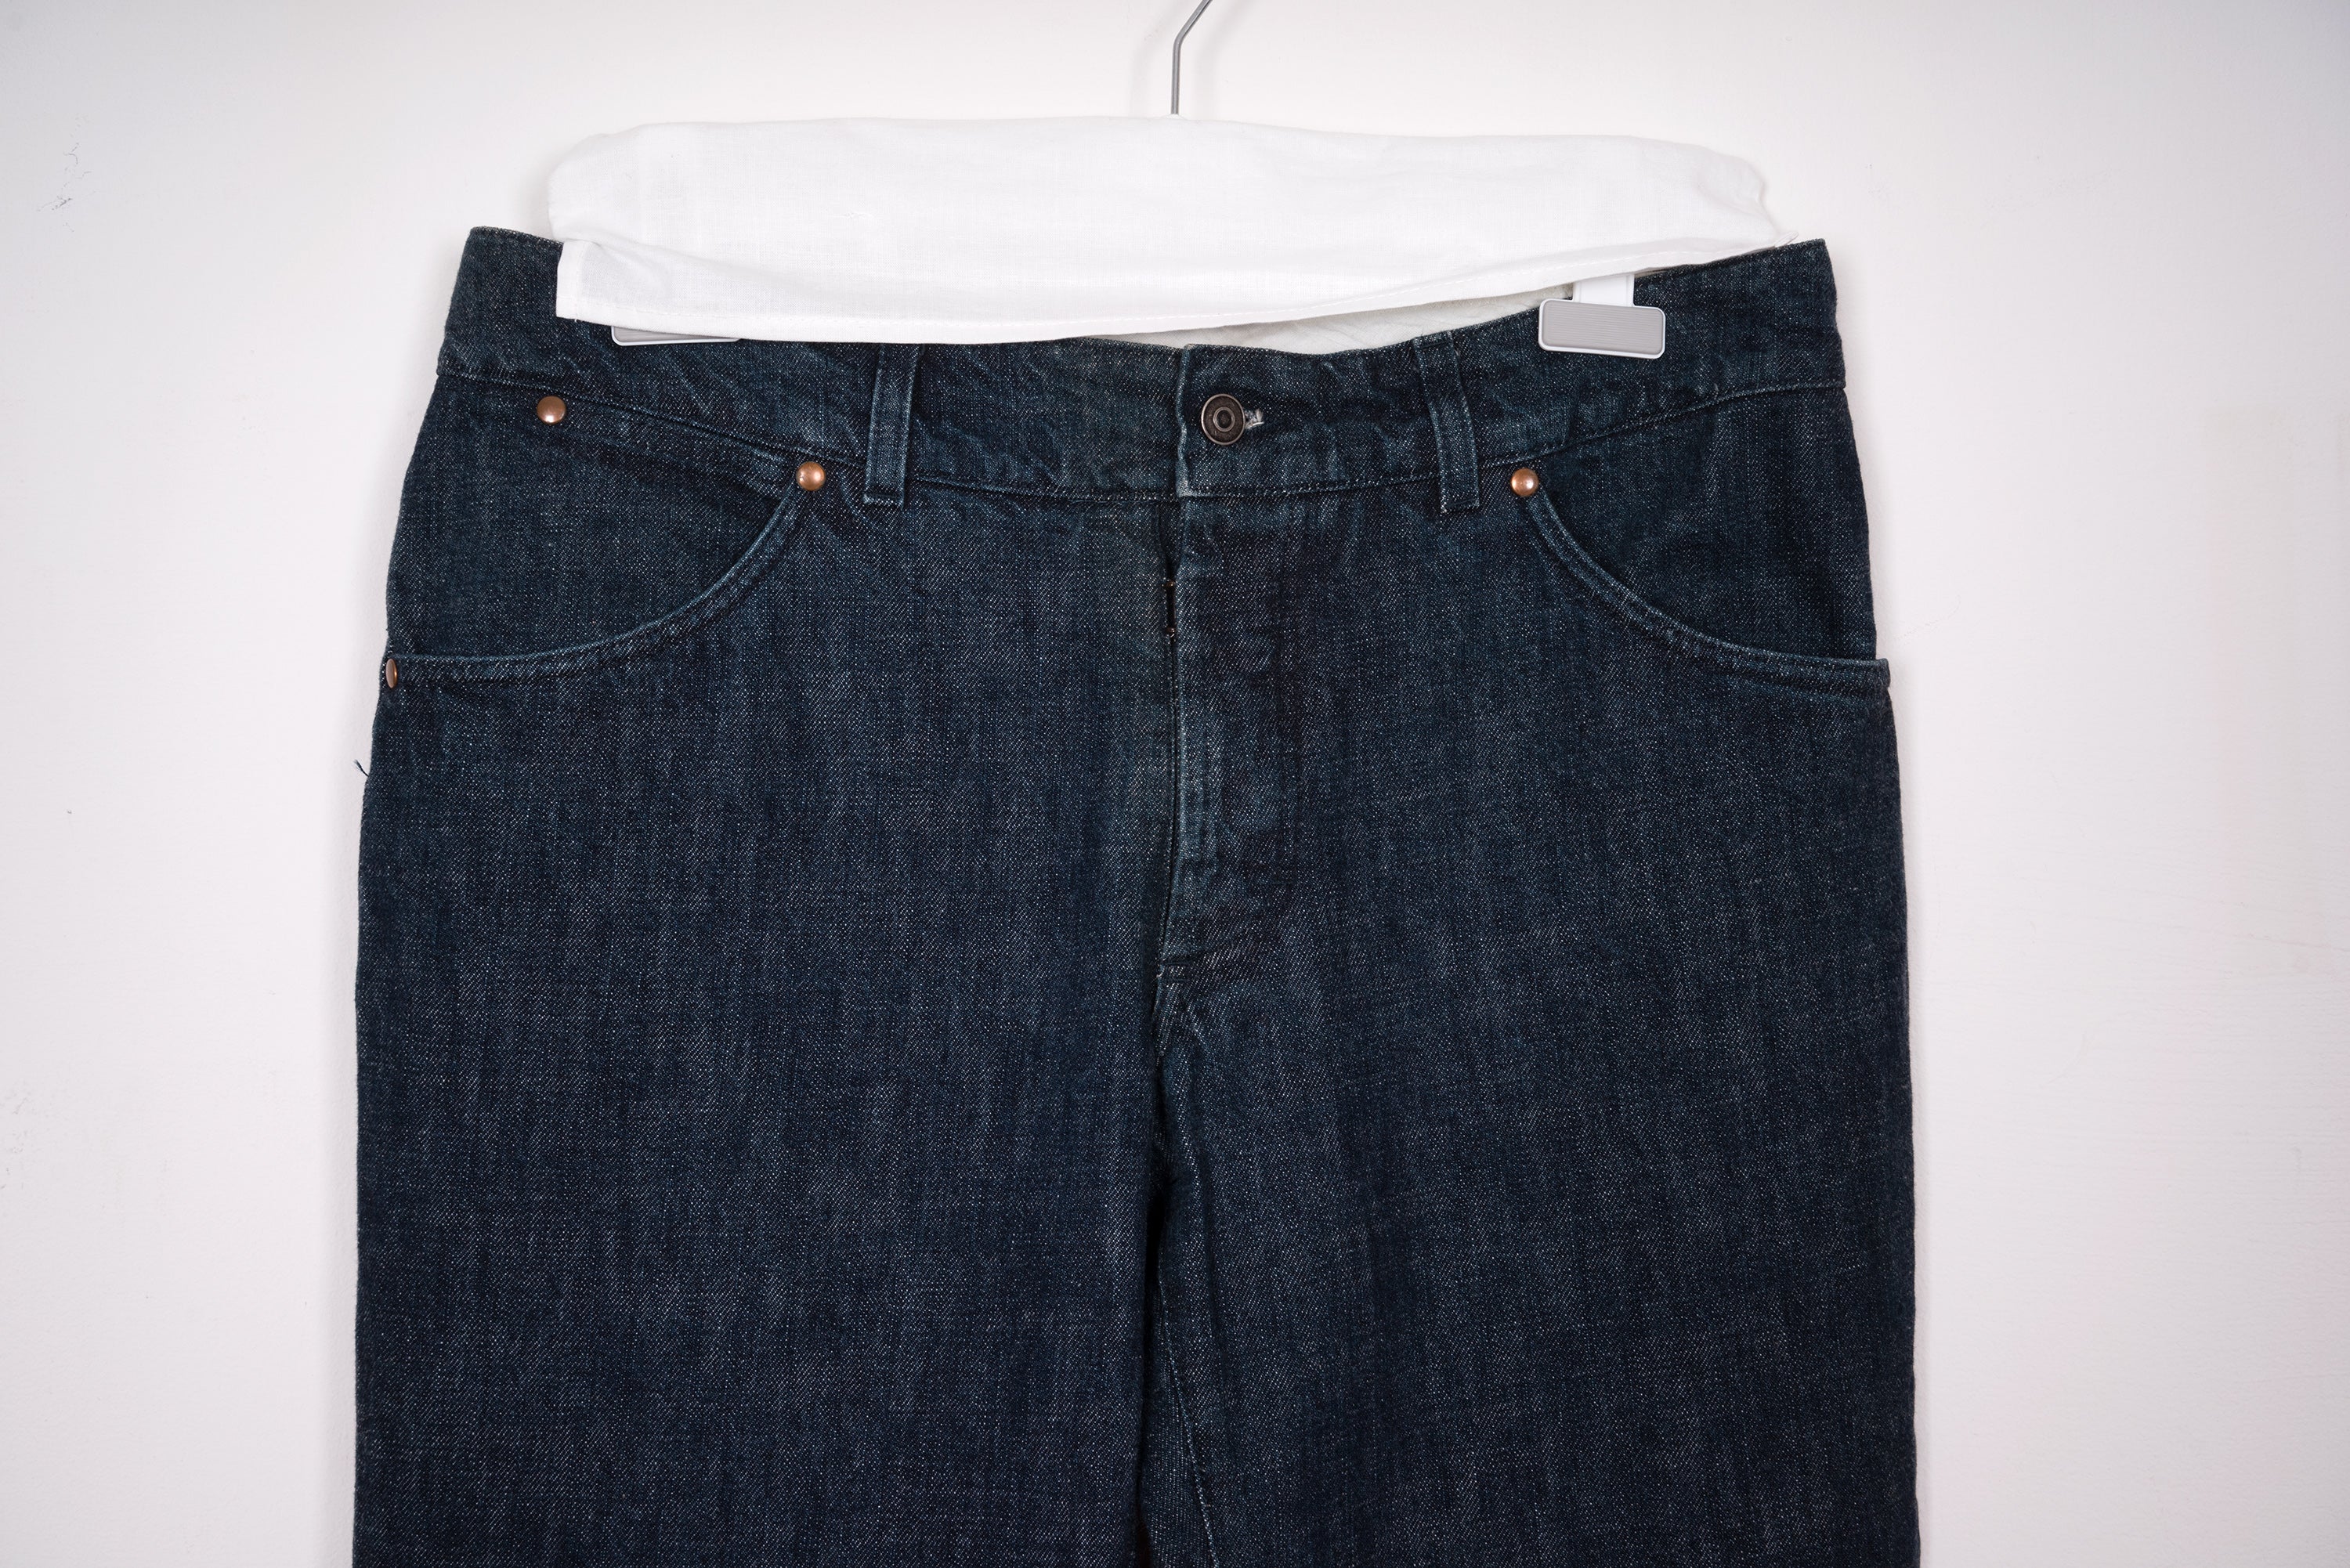 2004 S/S SIGNATURE DENIM PANTS WITH BLANK PATCH